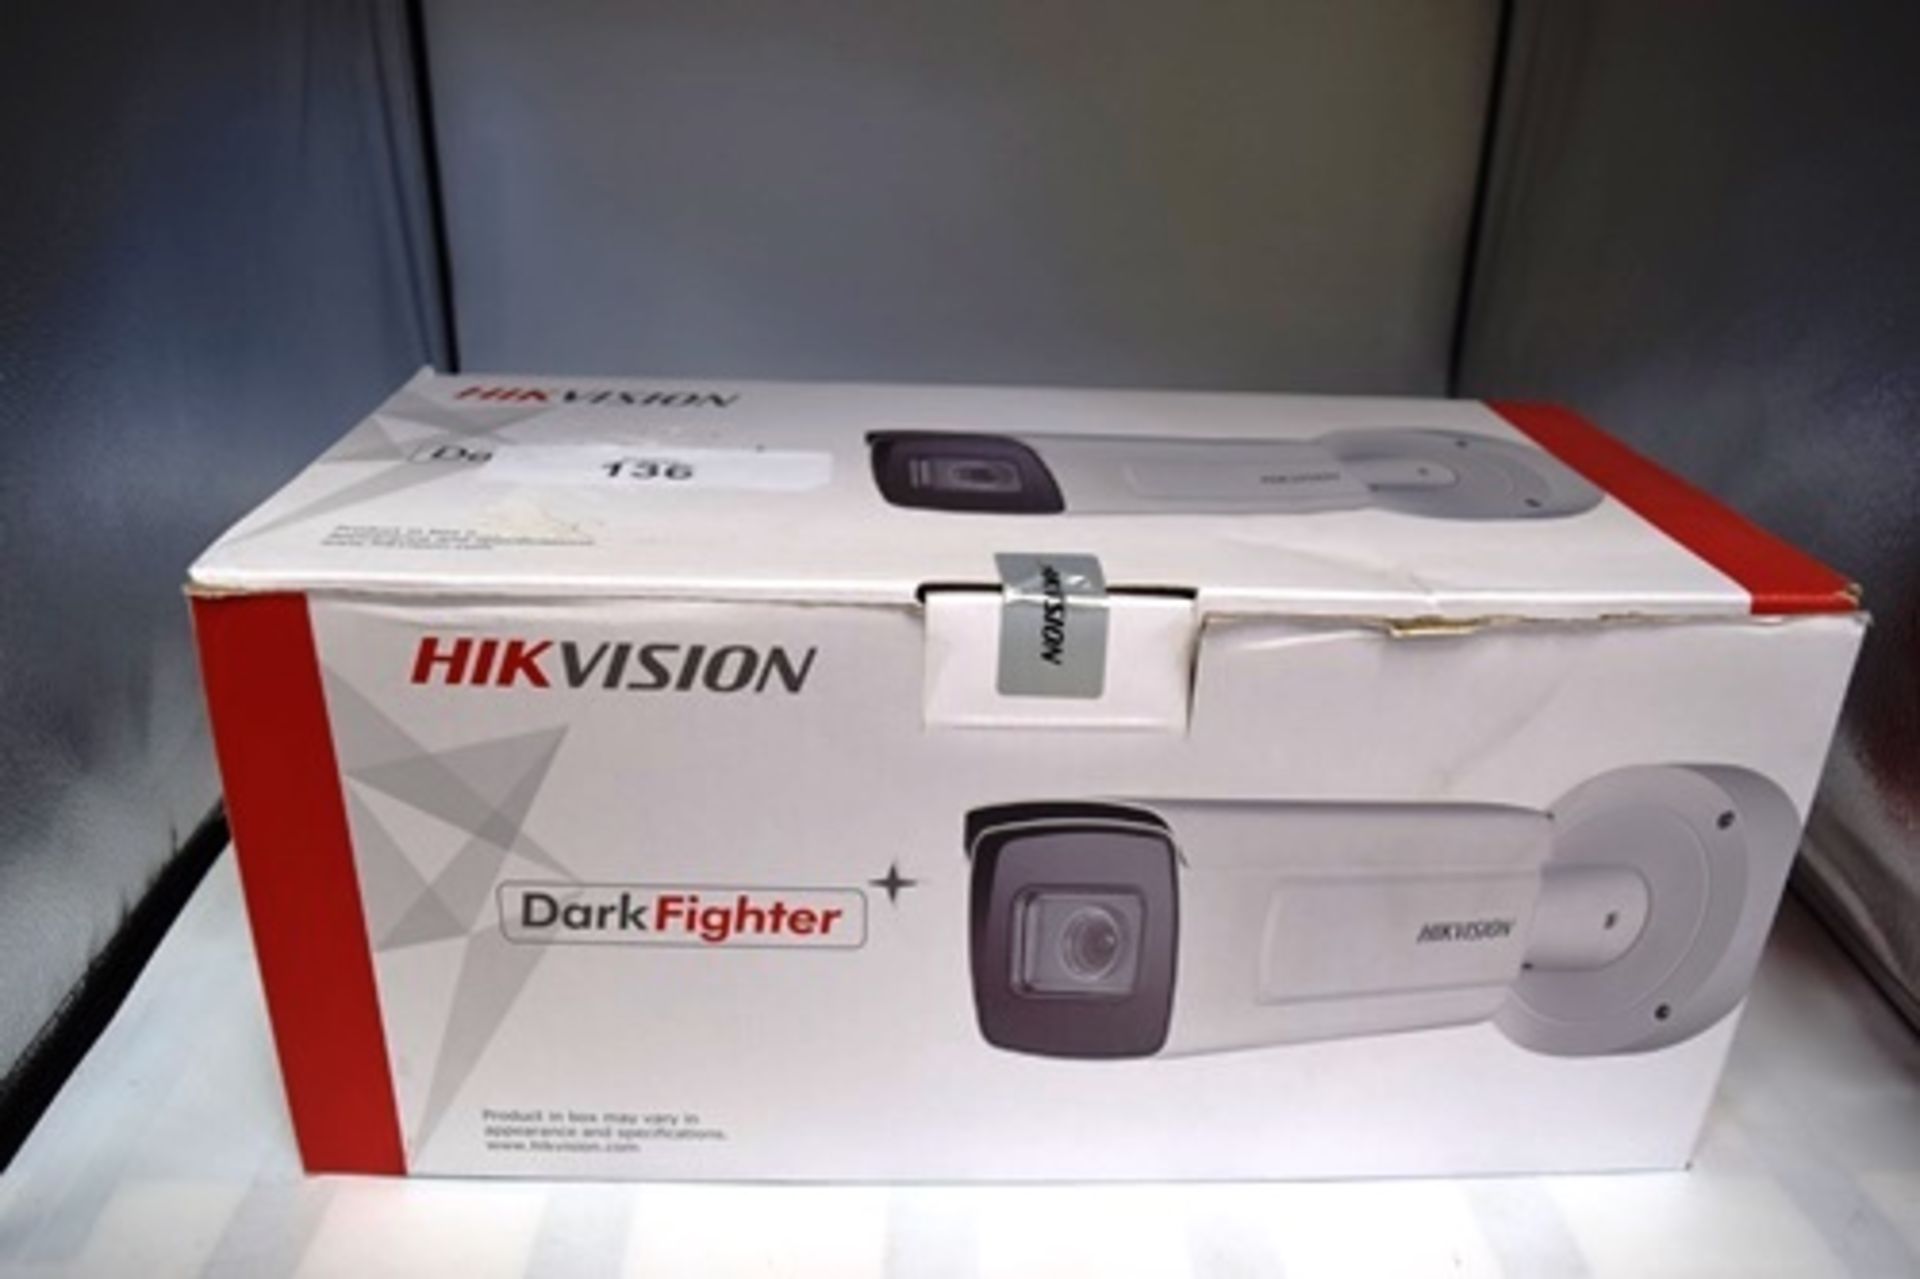 1 x Hikvision Dark Fighter network camera, model DS-2CD5A46GO-IZS 2.8-12mm 4MP - Sealed new in - Image 2 of 3